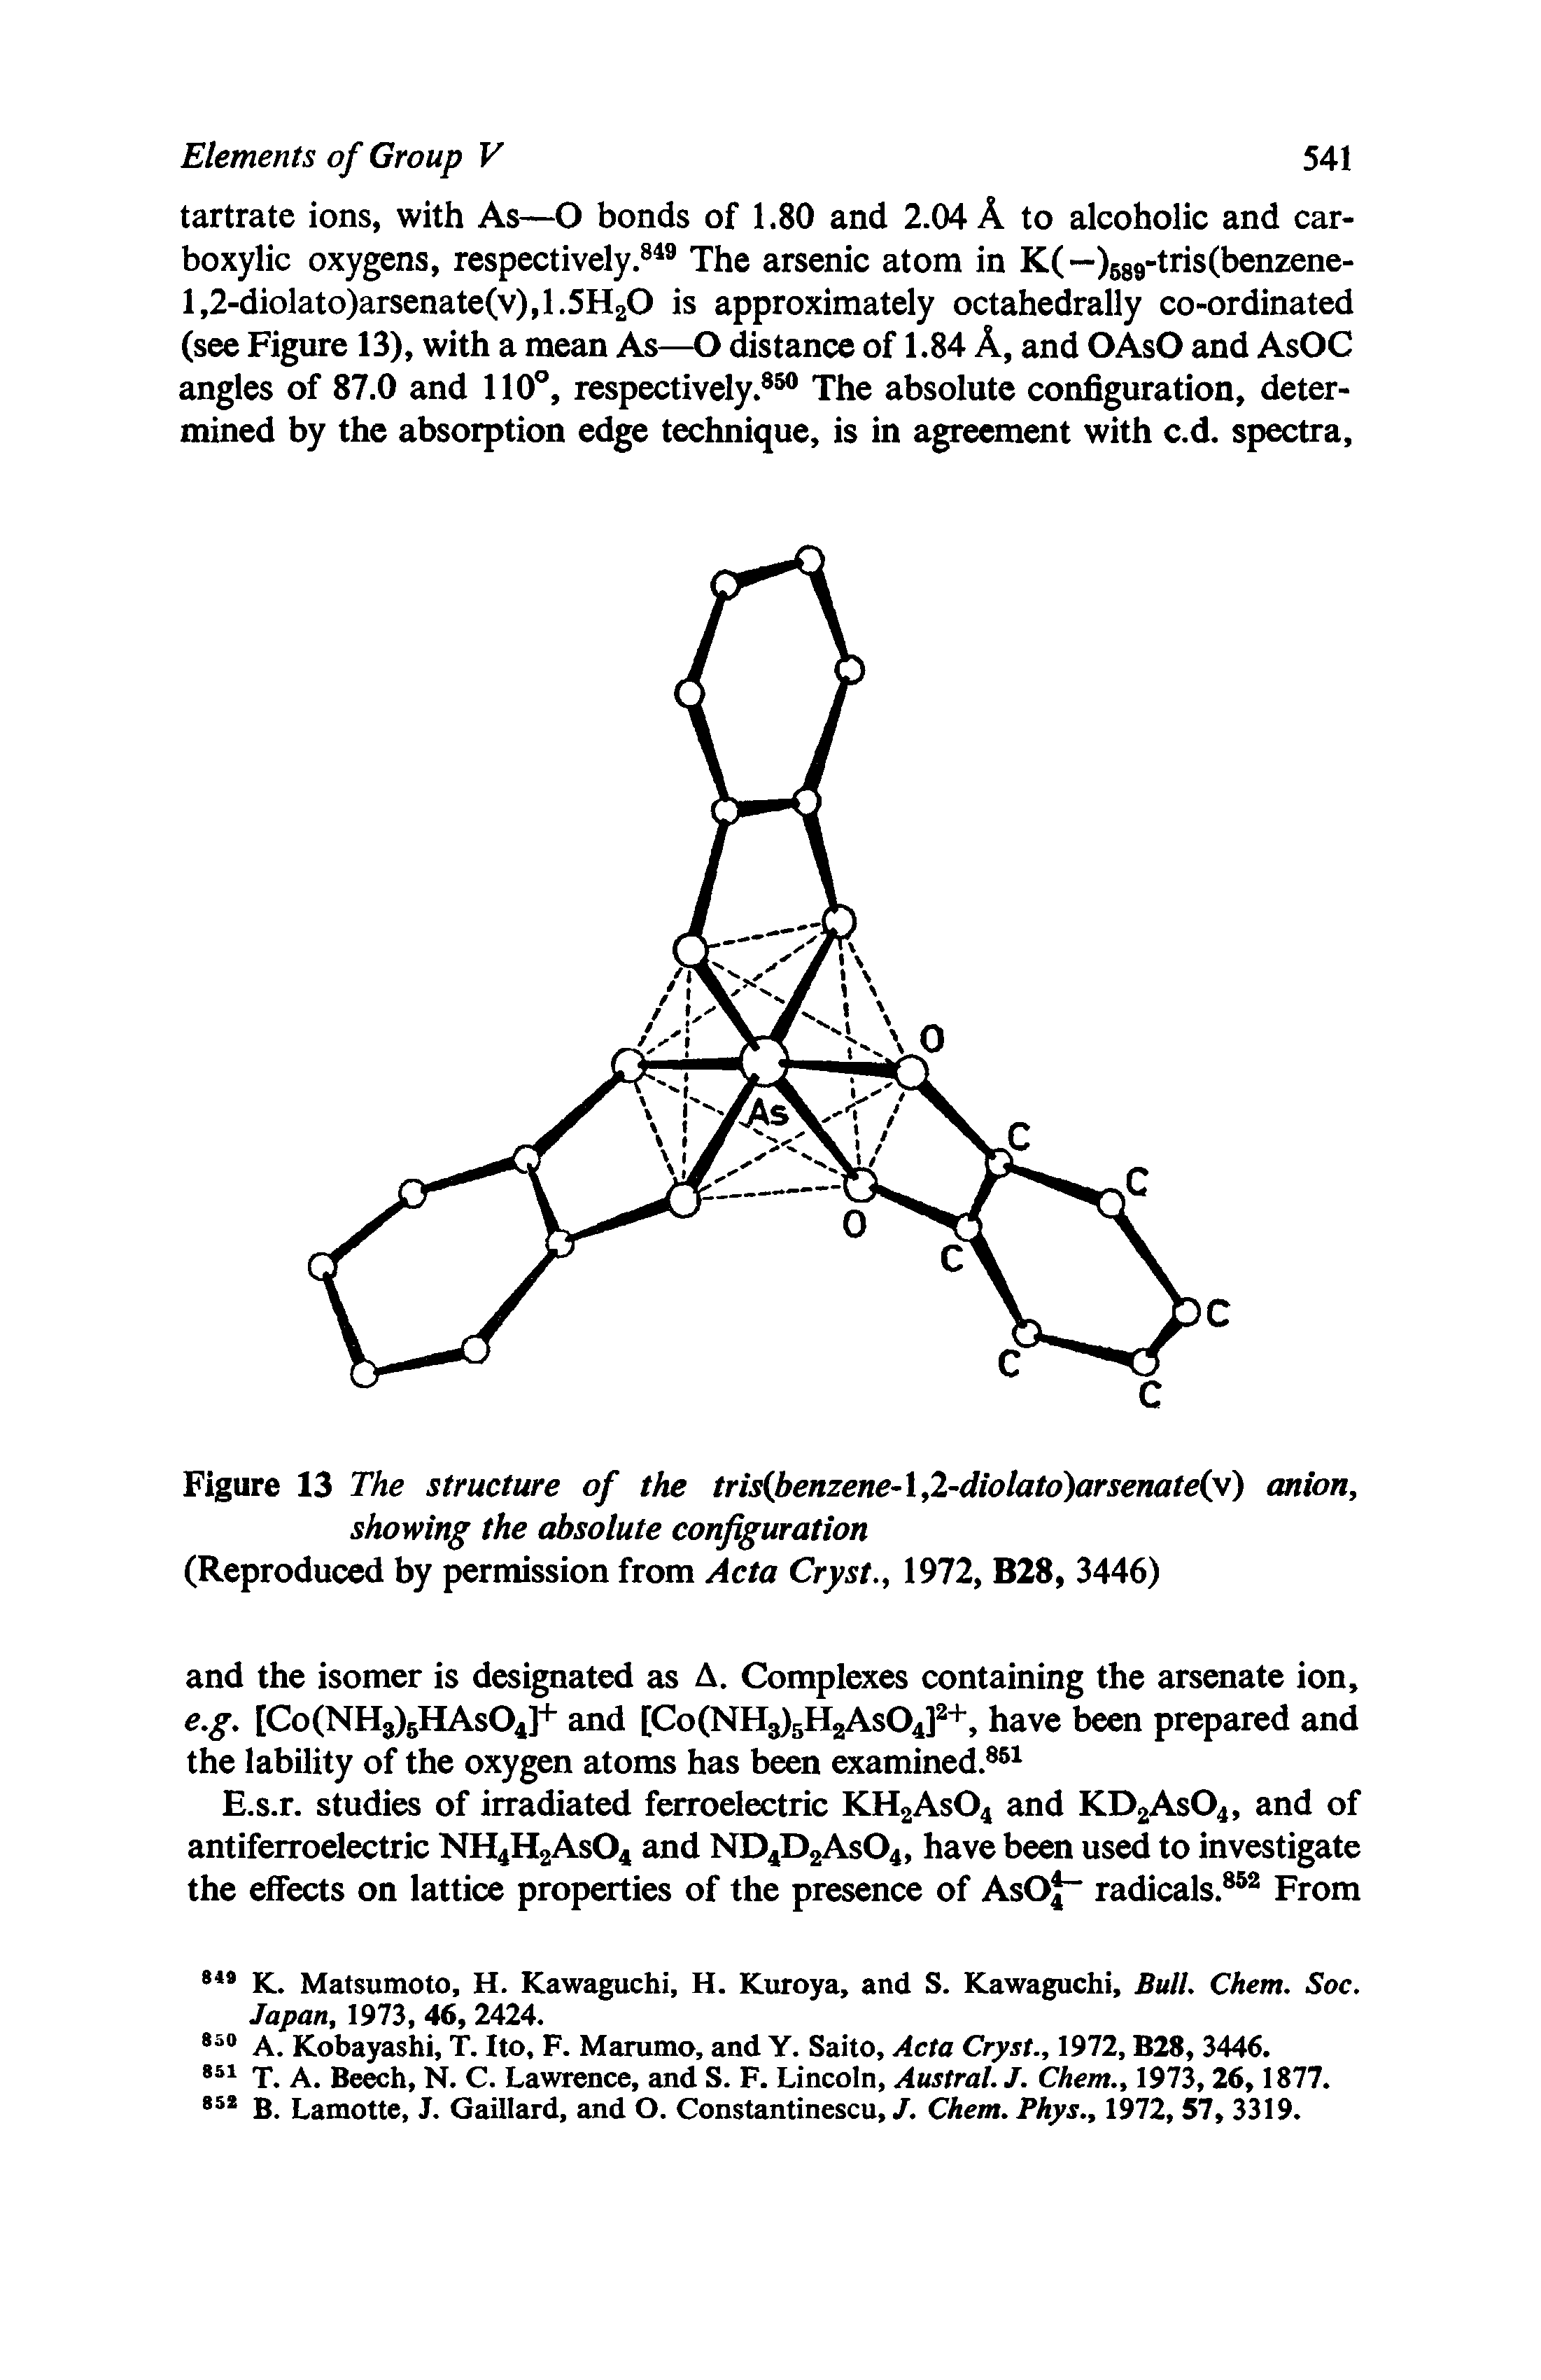 Figure 13 The structure of the tris(benzene-lf2-diolato)arsenate(y) anion, showing the absolute configuration (Reproduced by permission from Acta Cryst., 1972, B28, 3446)...